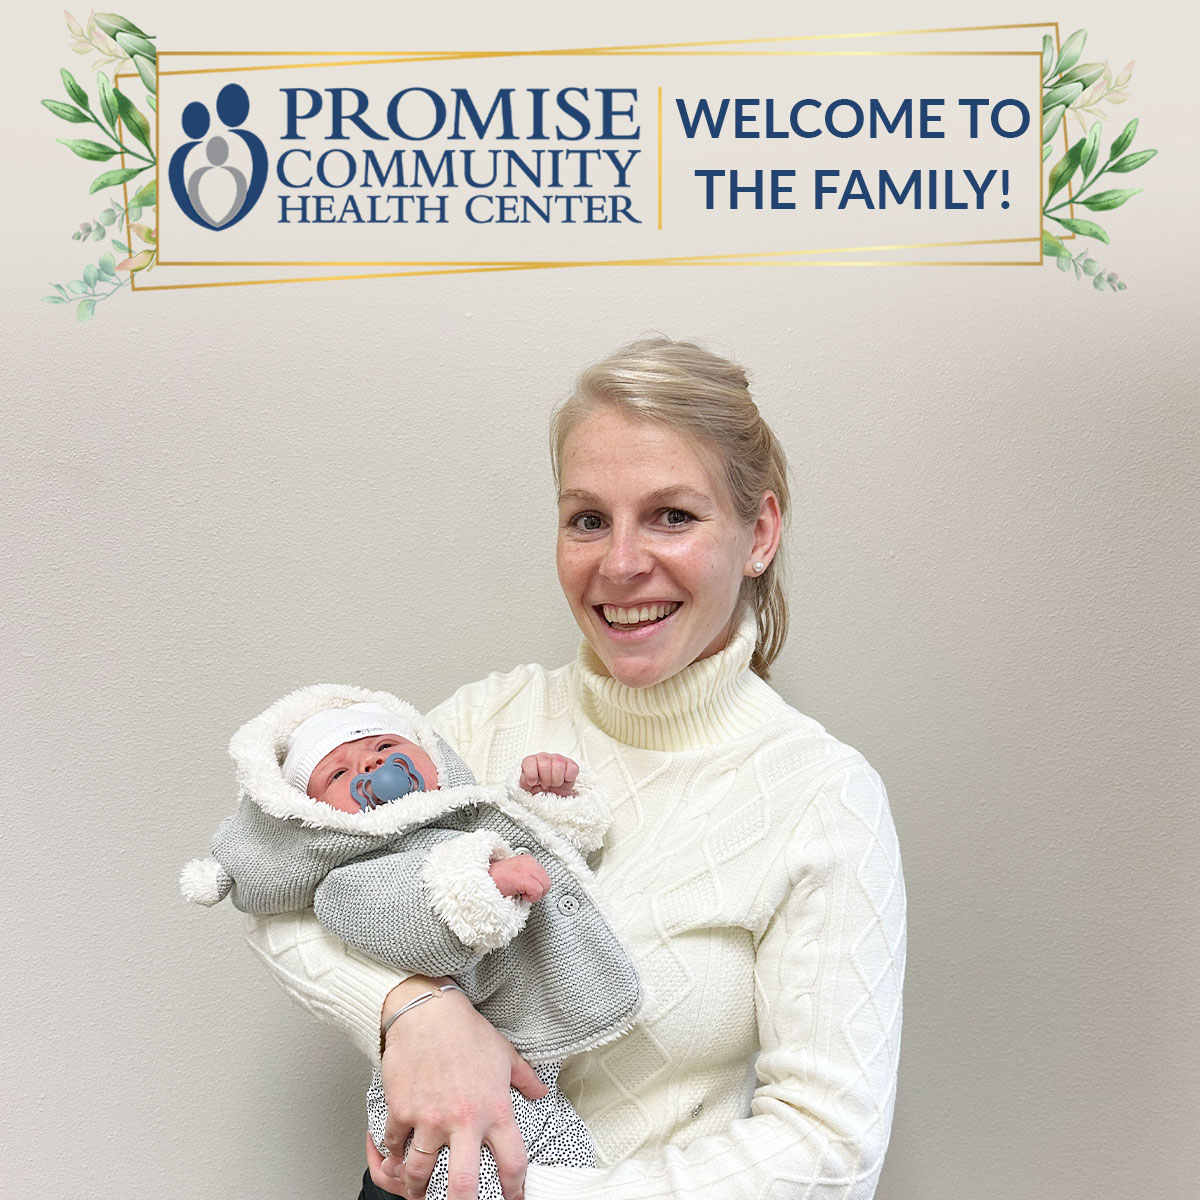 Promise Community Health Center in Sioux Center, Iowa | Midwives in northwest Iowa, Midwives in southeast South Dakota, Midwives in southwest Minnesota | Midwives in Sioux Falls South Dakota, Midwives in Beresford South Dakota, Midwives in Sioux City IA, Midwives in LeMars IA, Midwives in Worthington MN, Midwives in Iowa, Midwives in South Dakota, Midwives in Minnesota